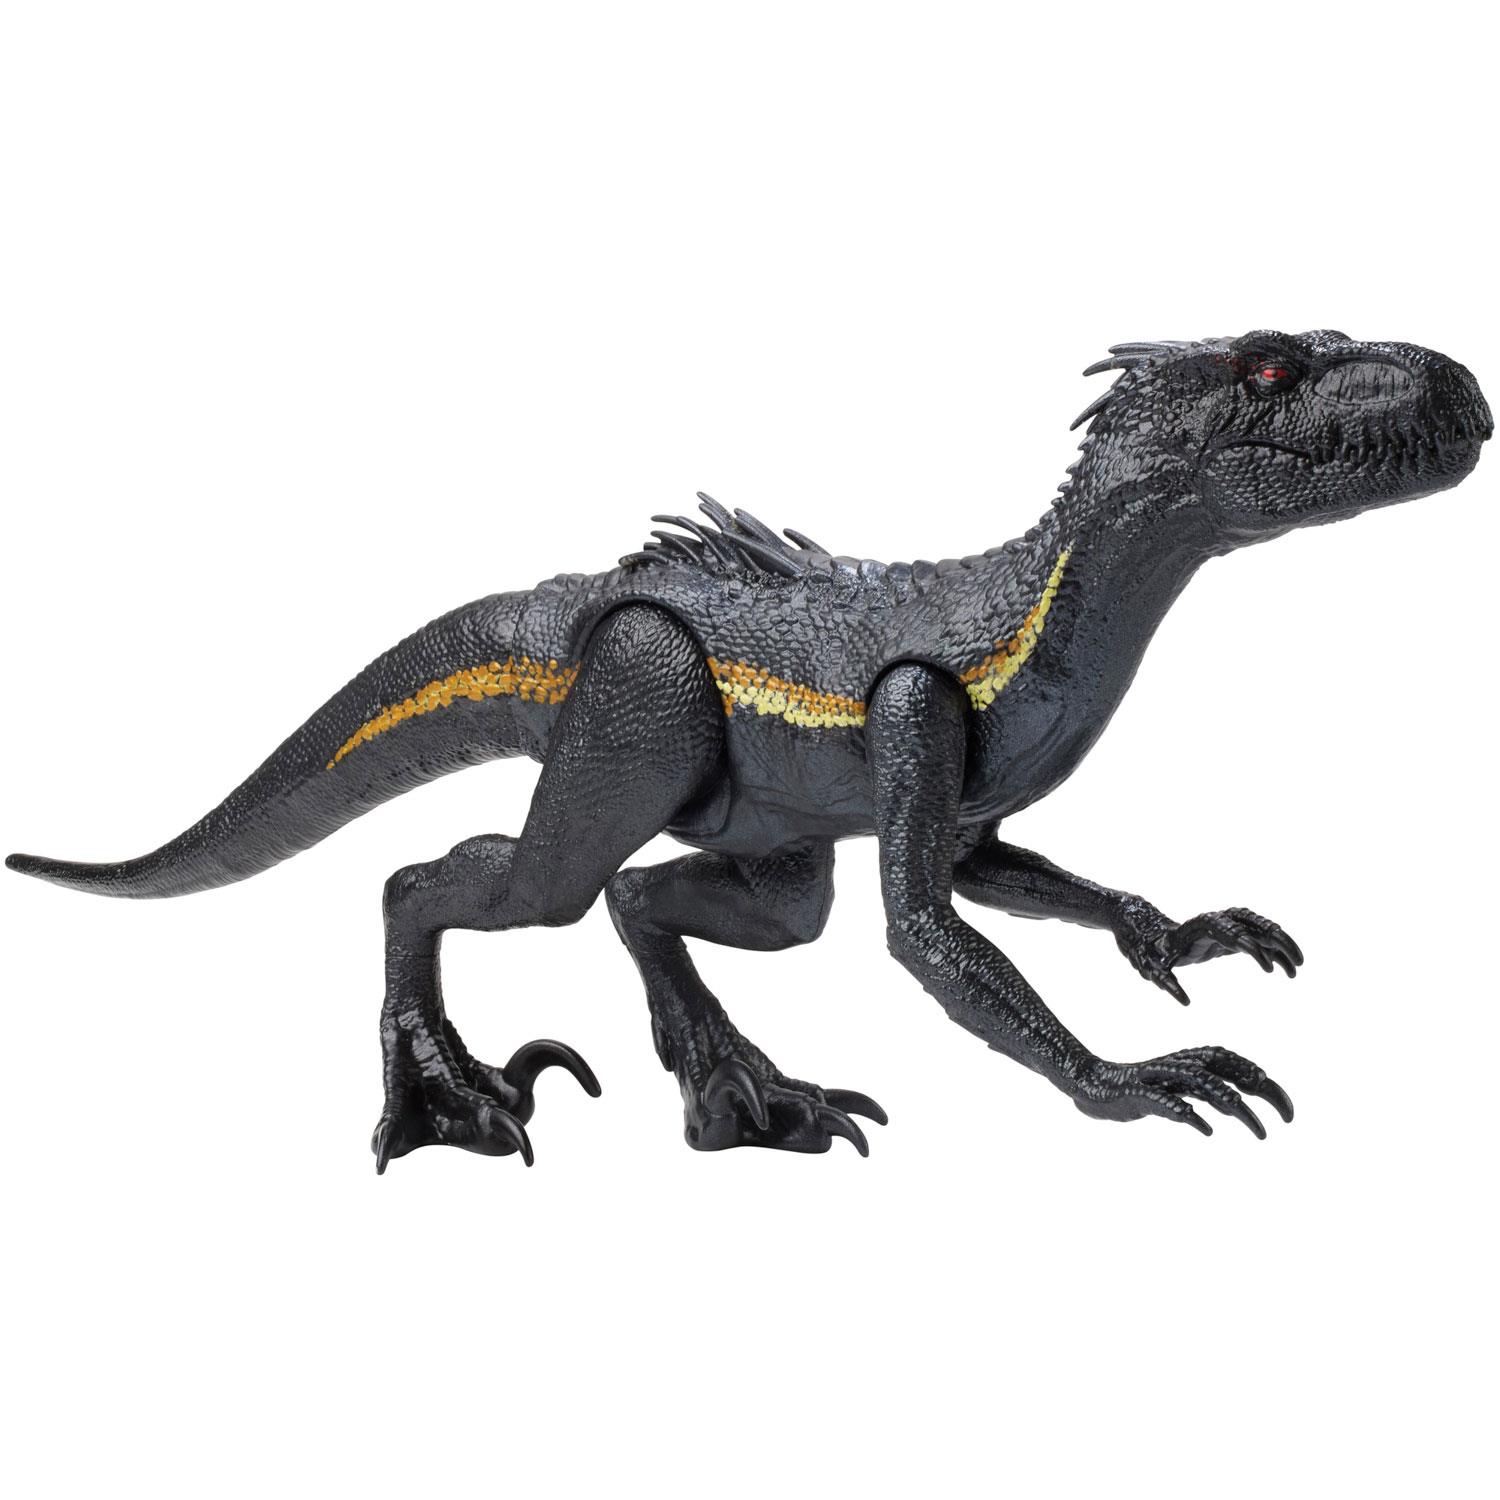 This version of Indoraptor pleased me very much. 